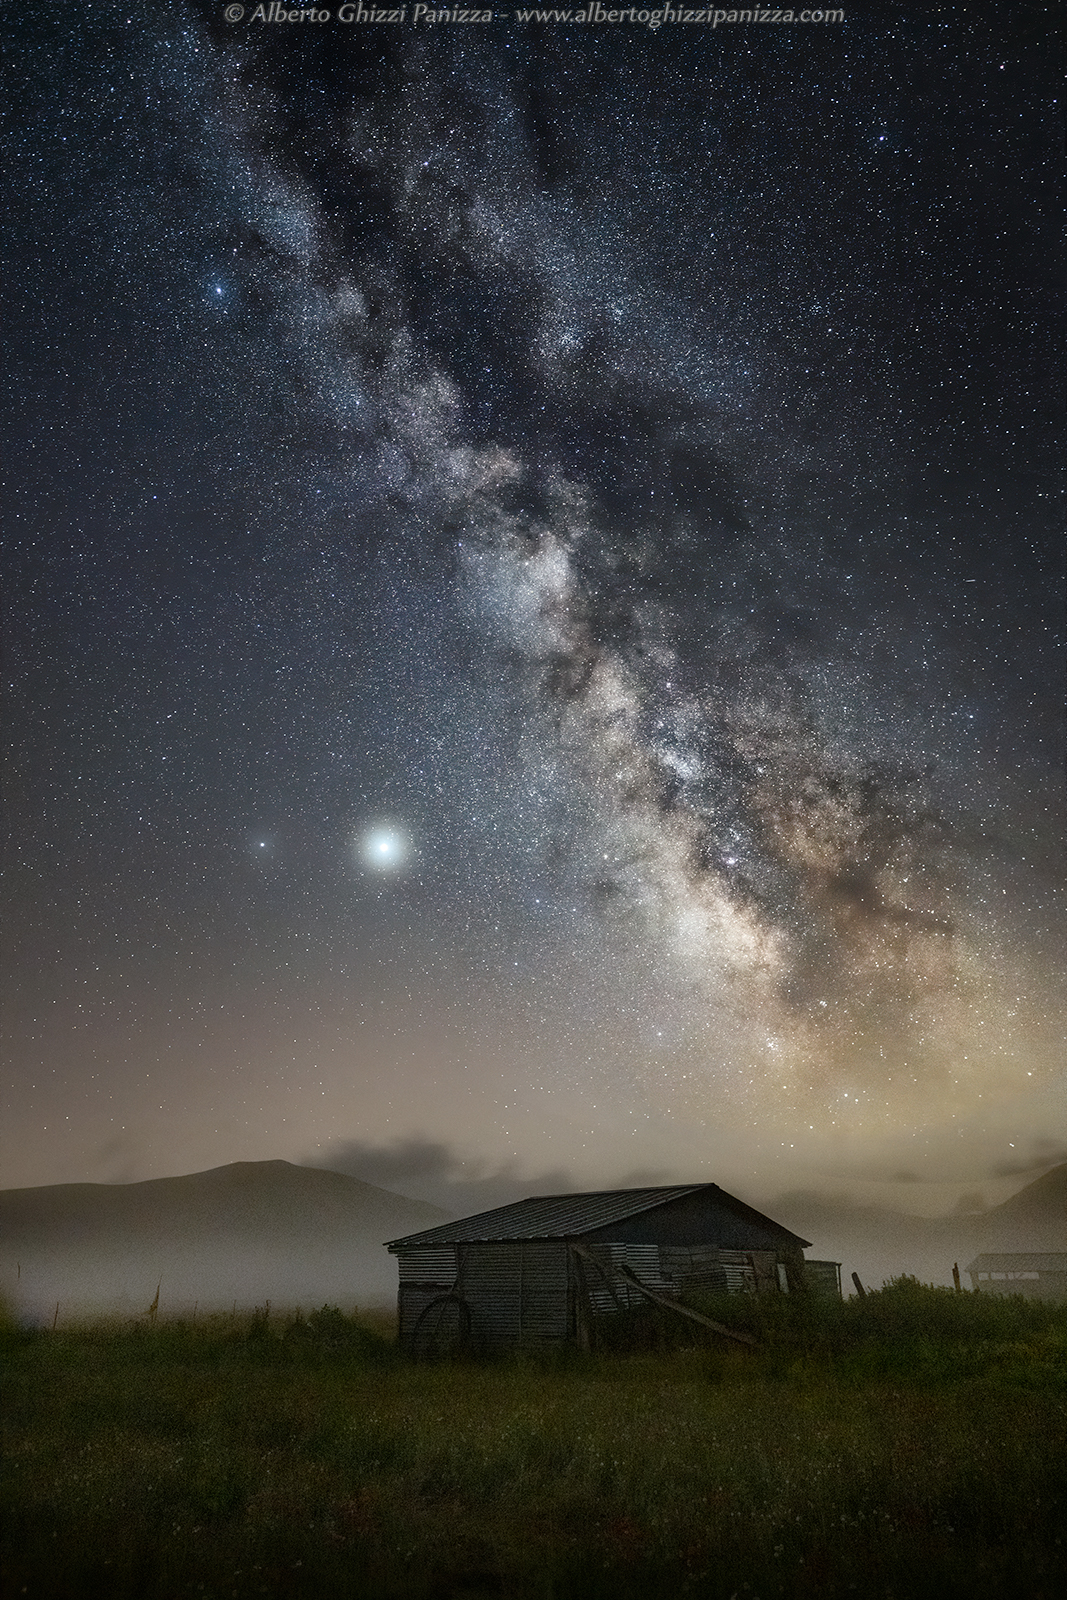 The Milky Way in the mists of the plain...